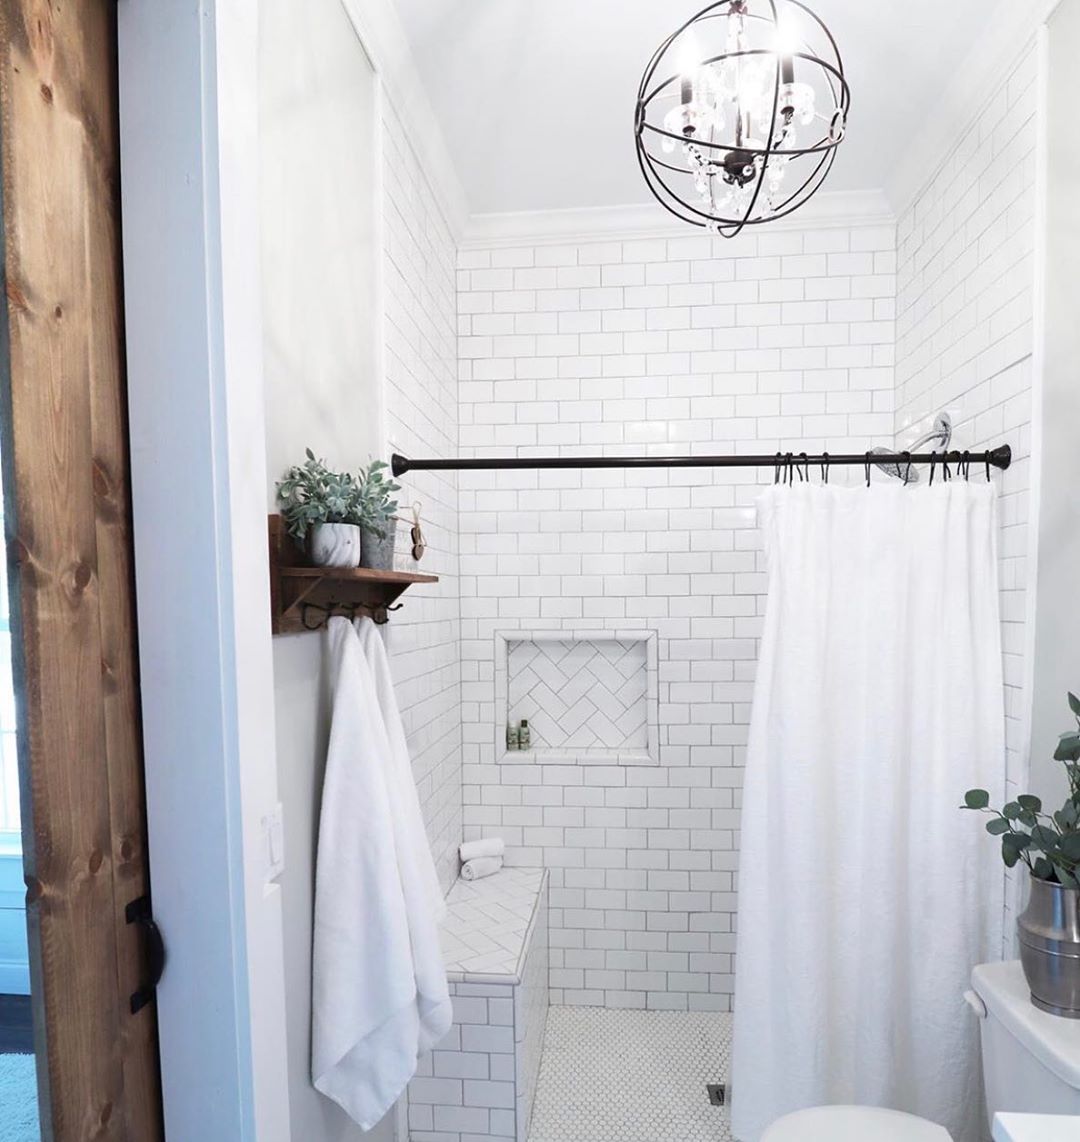 Renovated Bathroom with Subway Tile in Shower. Photo by Instagram user @thedawsonhouse_